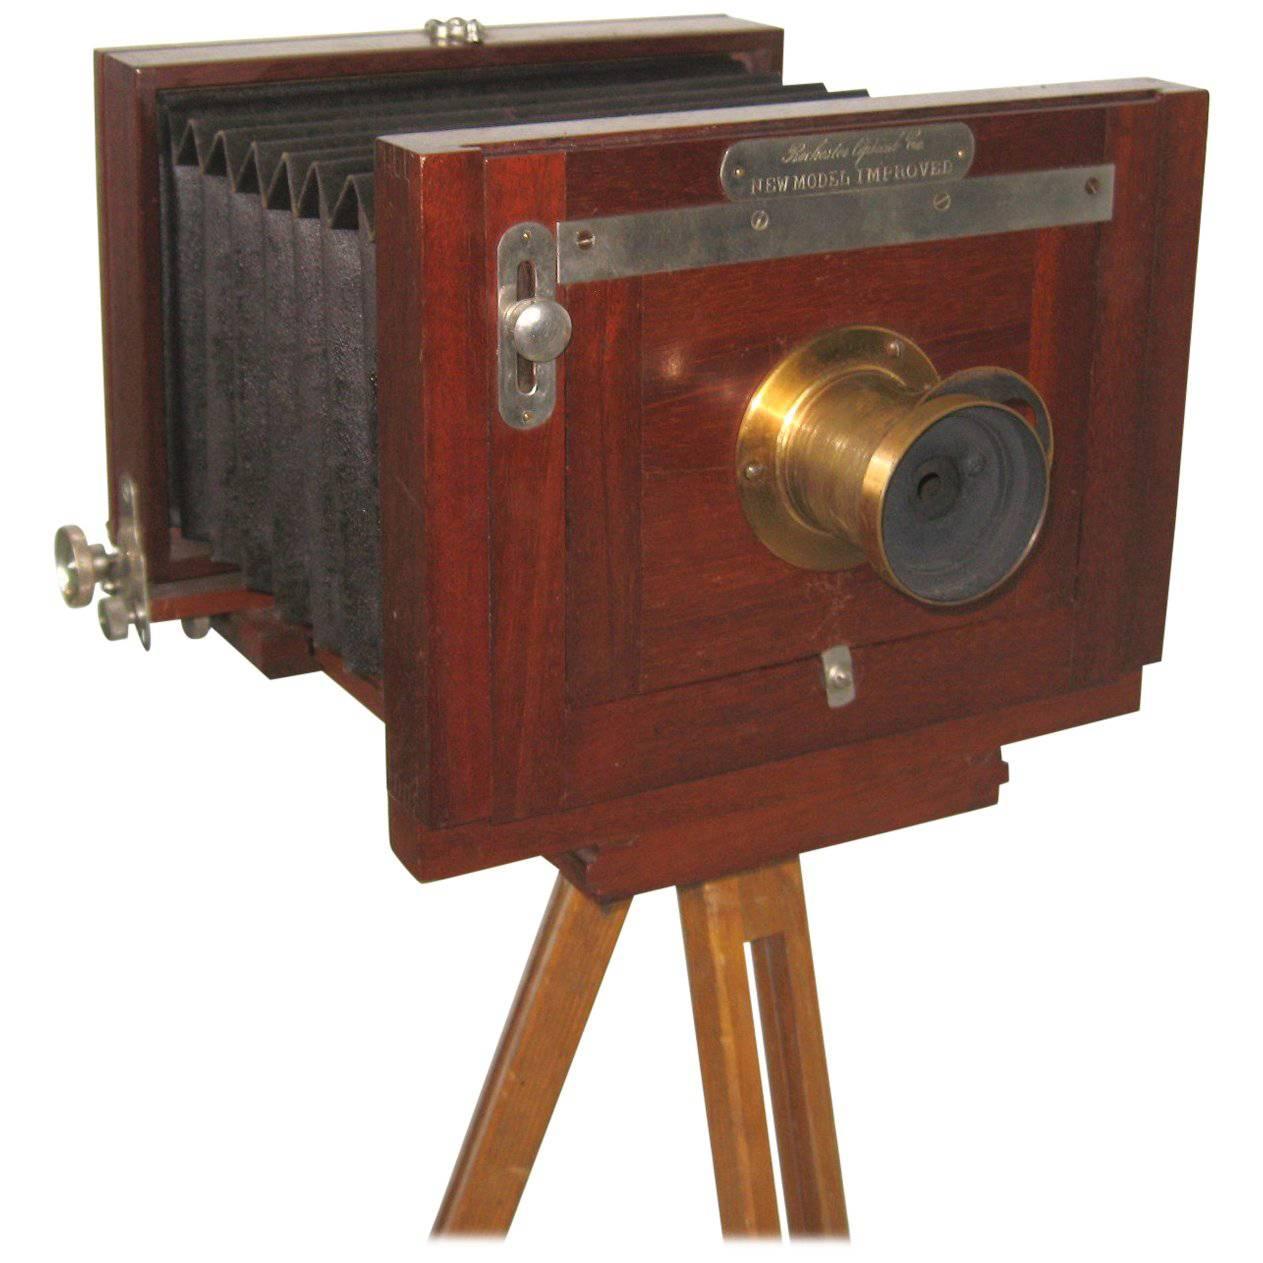 Antique 5 x 7 large format camera with a tripod was made by the Rochester Optical Co. in Rochester, NY. New model improved.
The lens is R O Co 1 1/2 and the original wood caring case. Be sure to check our storefront for many more decorating ideas,